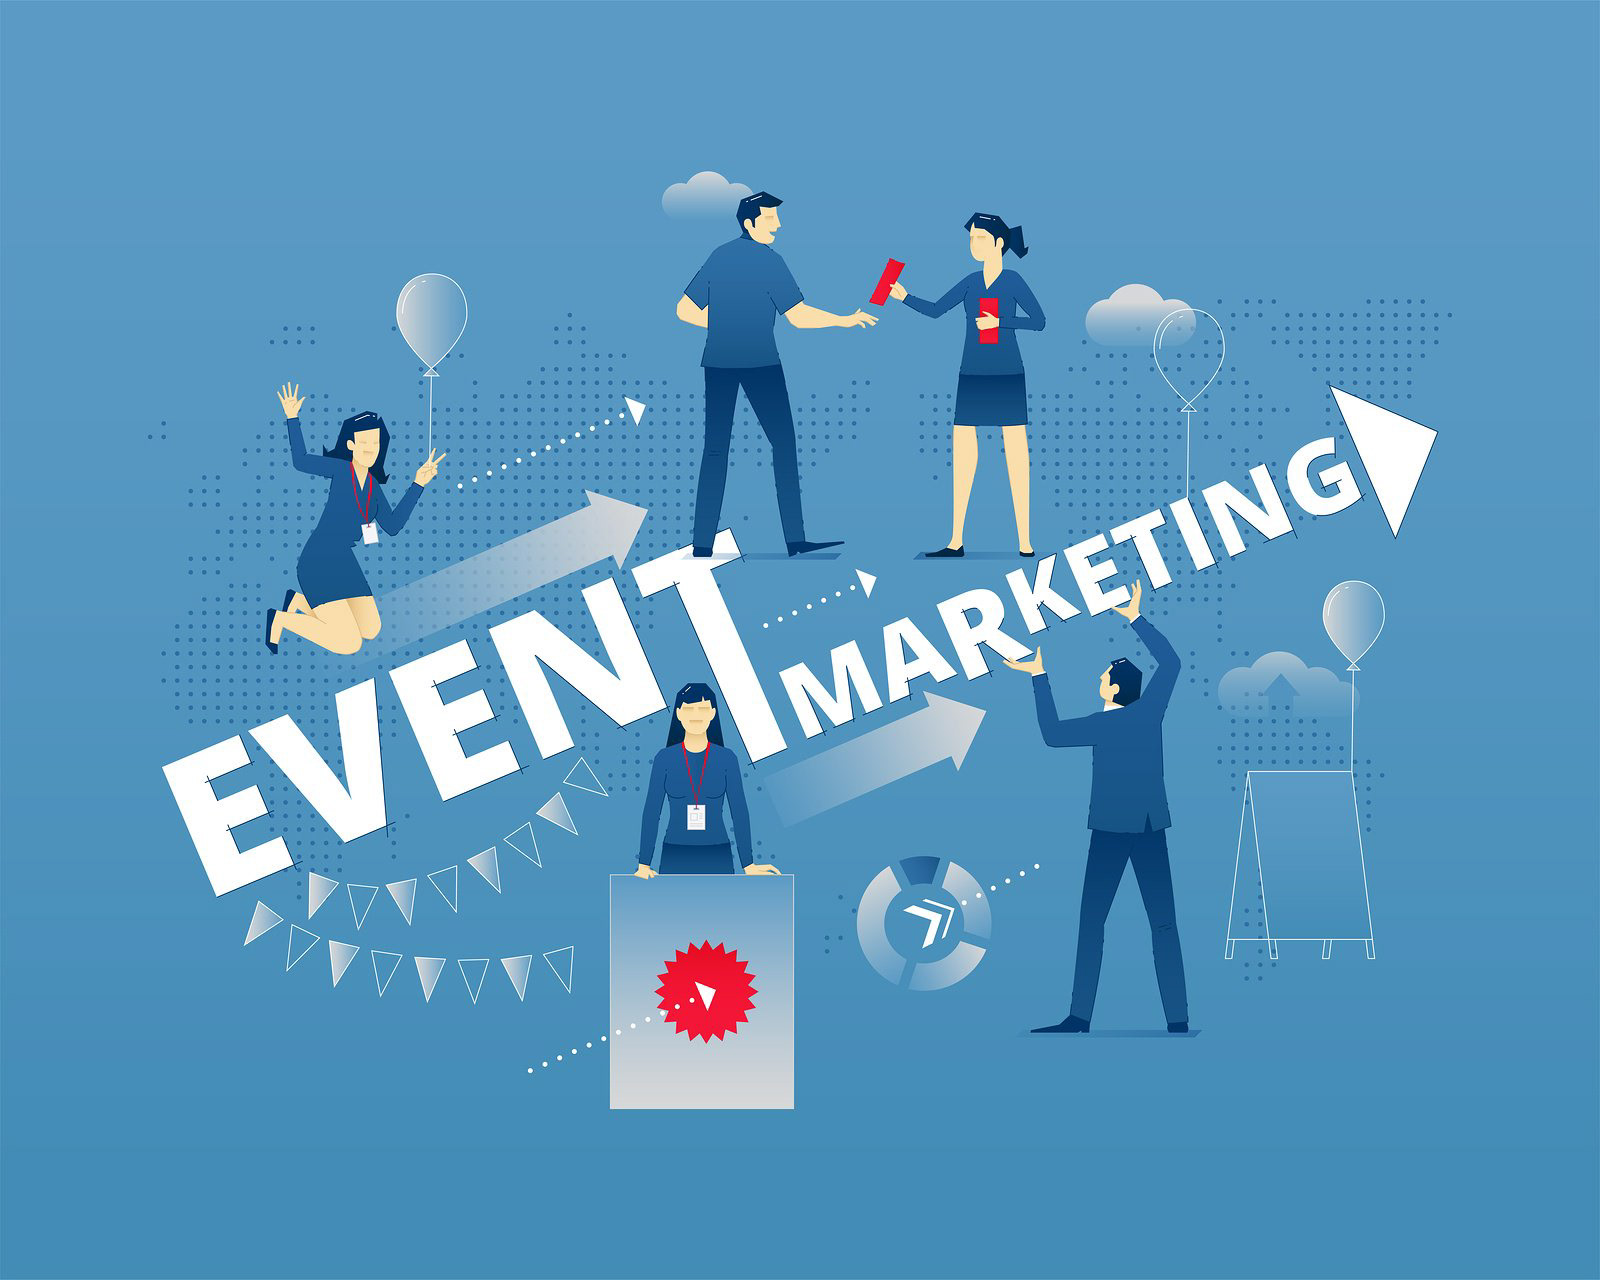 Event marketing: Organizing and conducting events to interact with customers and partners